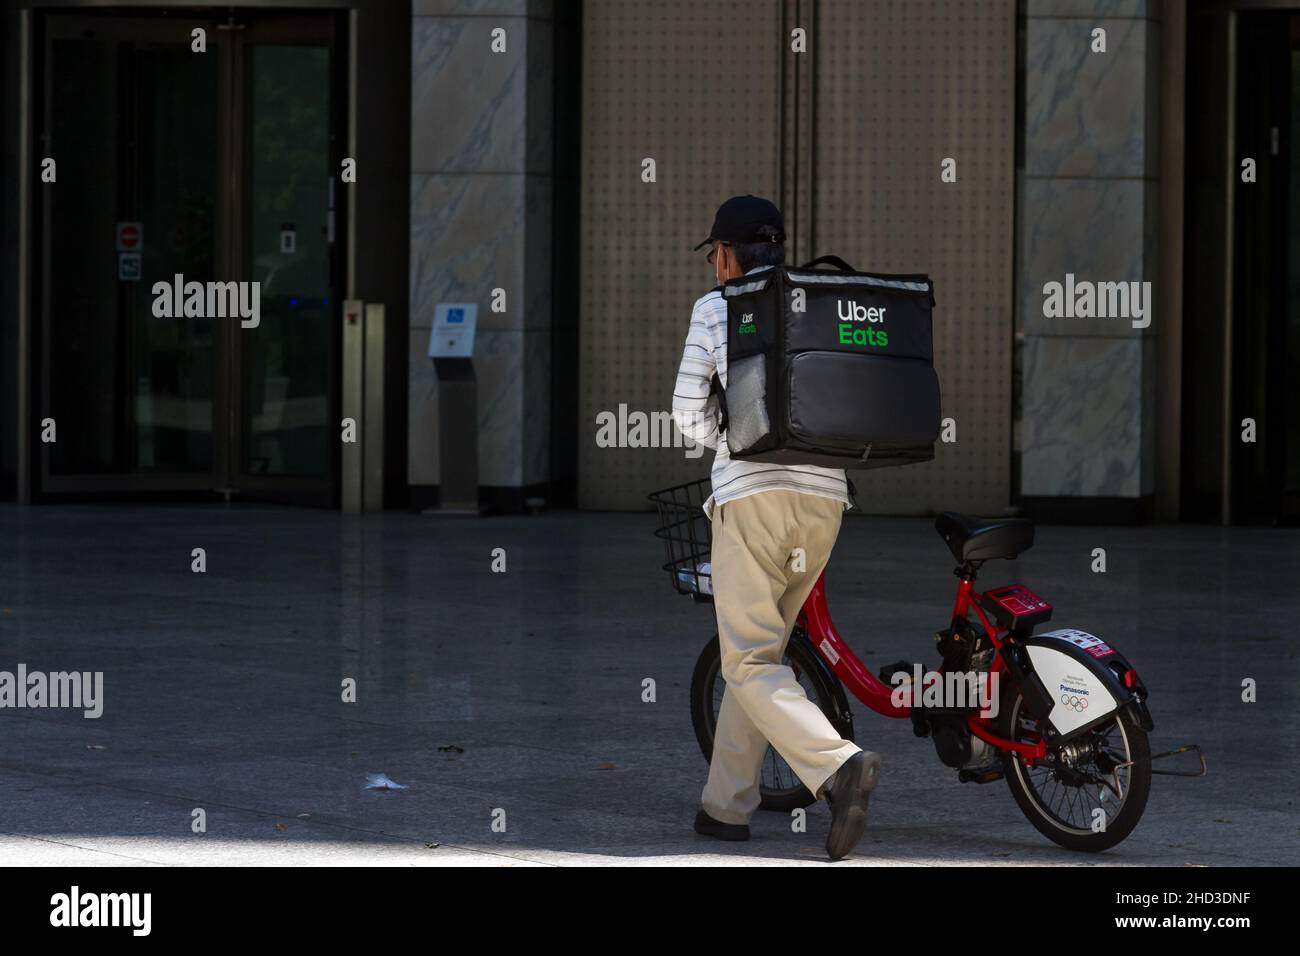 An older Japanese man uses a rental bicycle to deliver food with Uber Eats. Nagatacho,,Tokyo, Japan. Stock Photo